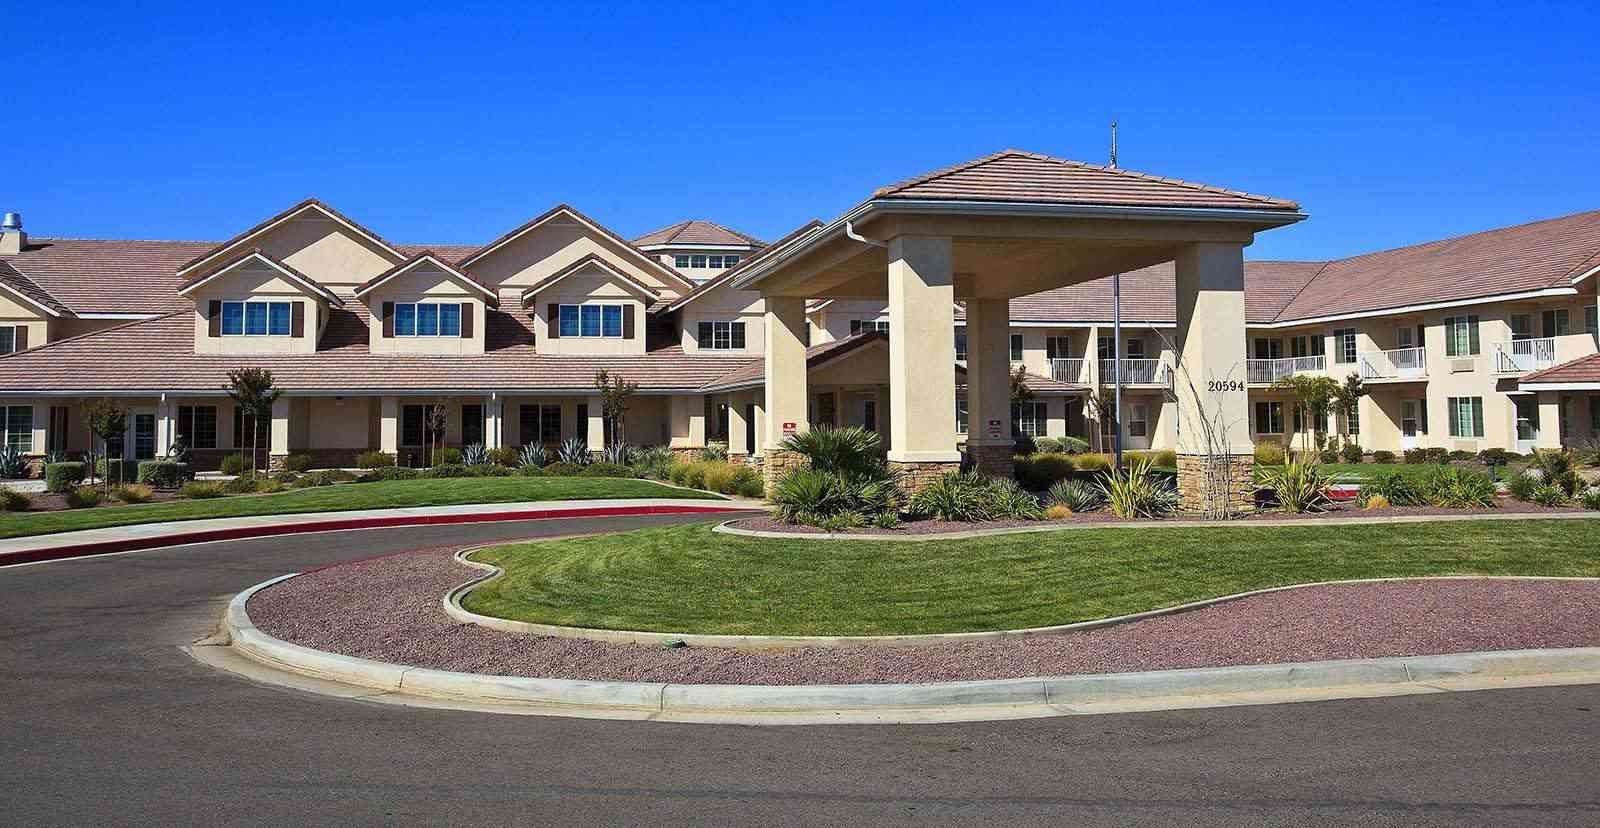 Neighborhood view of Solstice Senior Living At Apple Valley with lush grass and modern architecture.